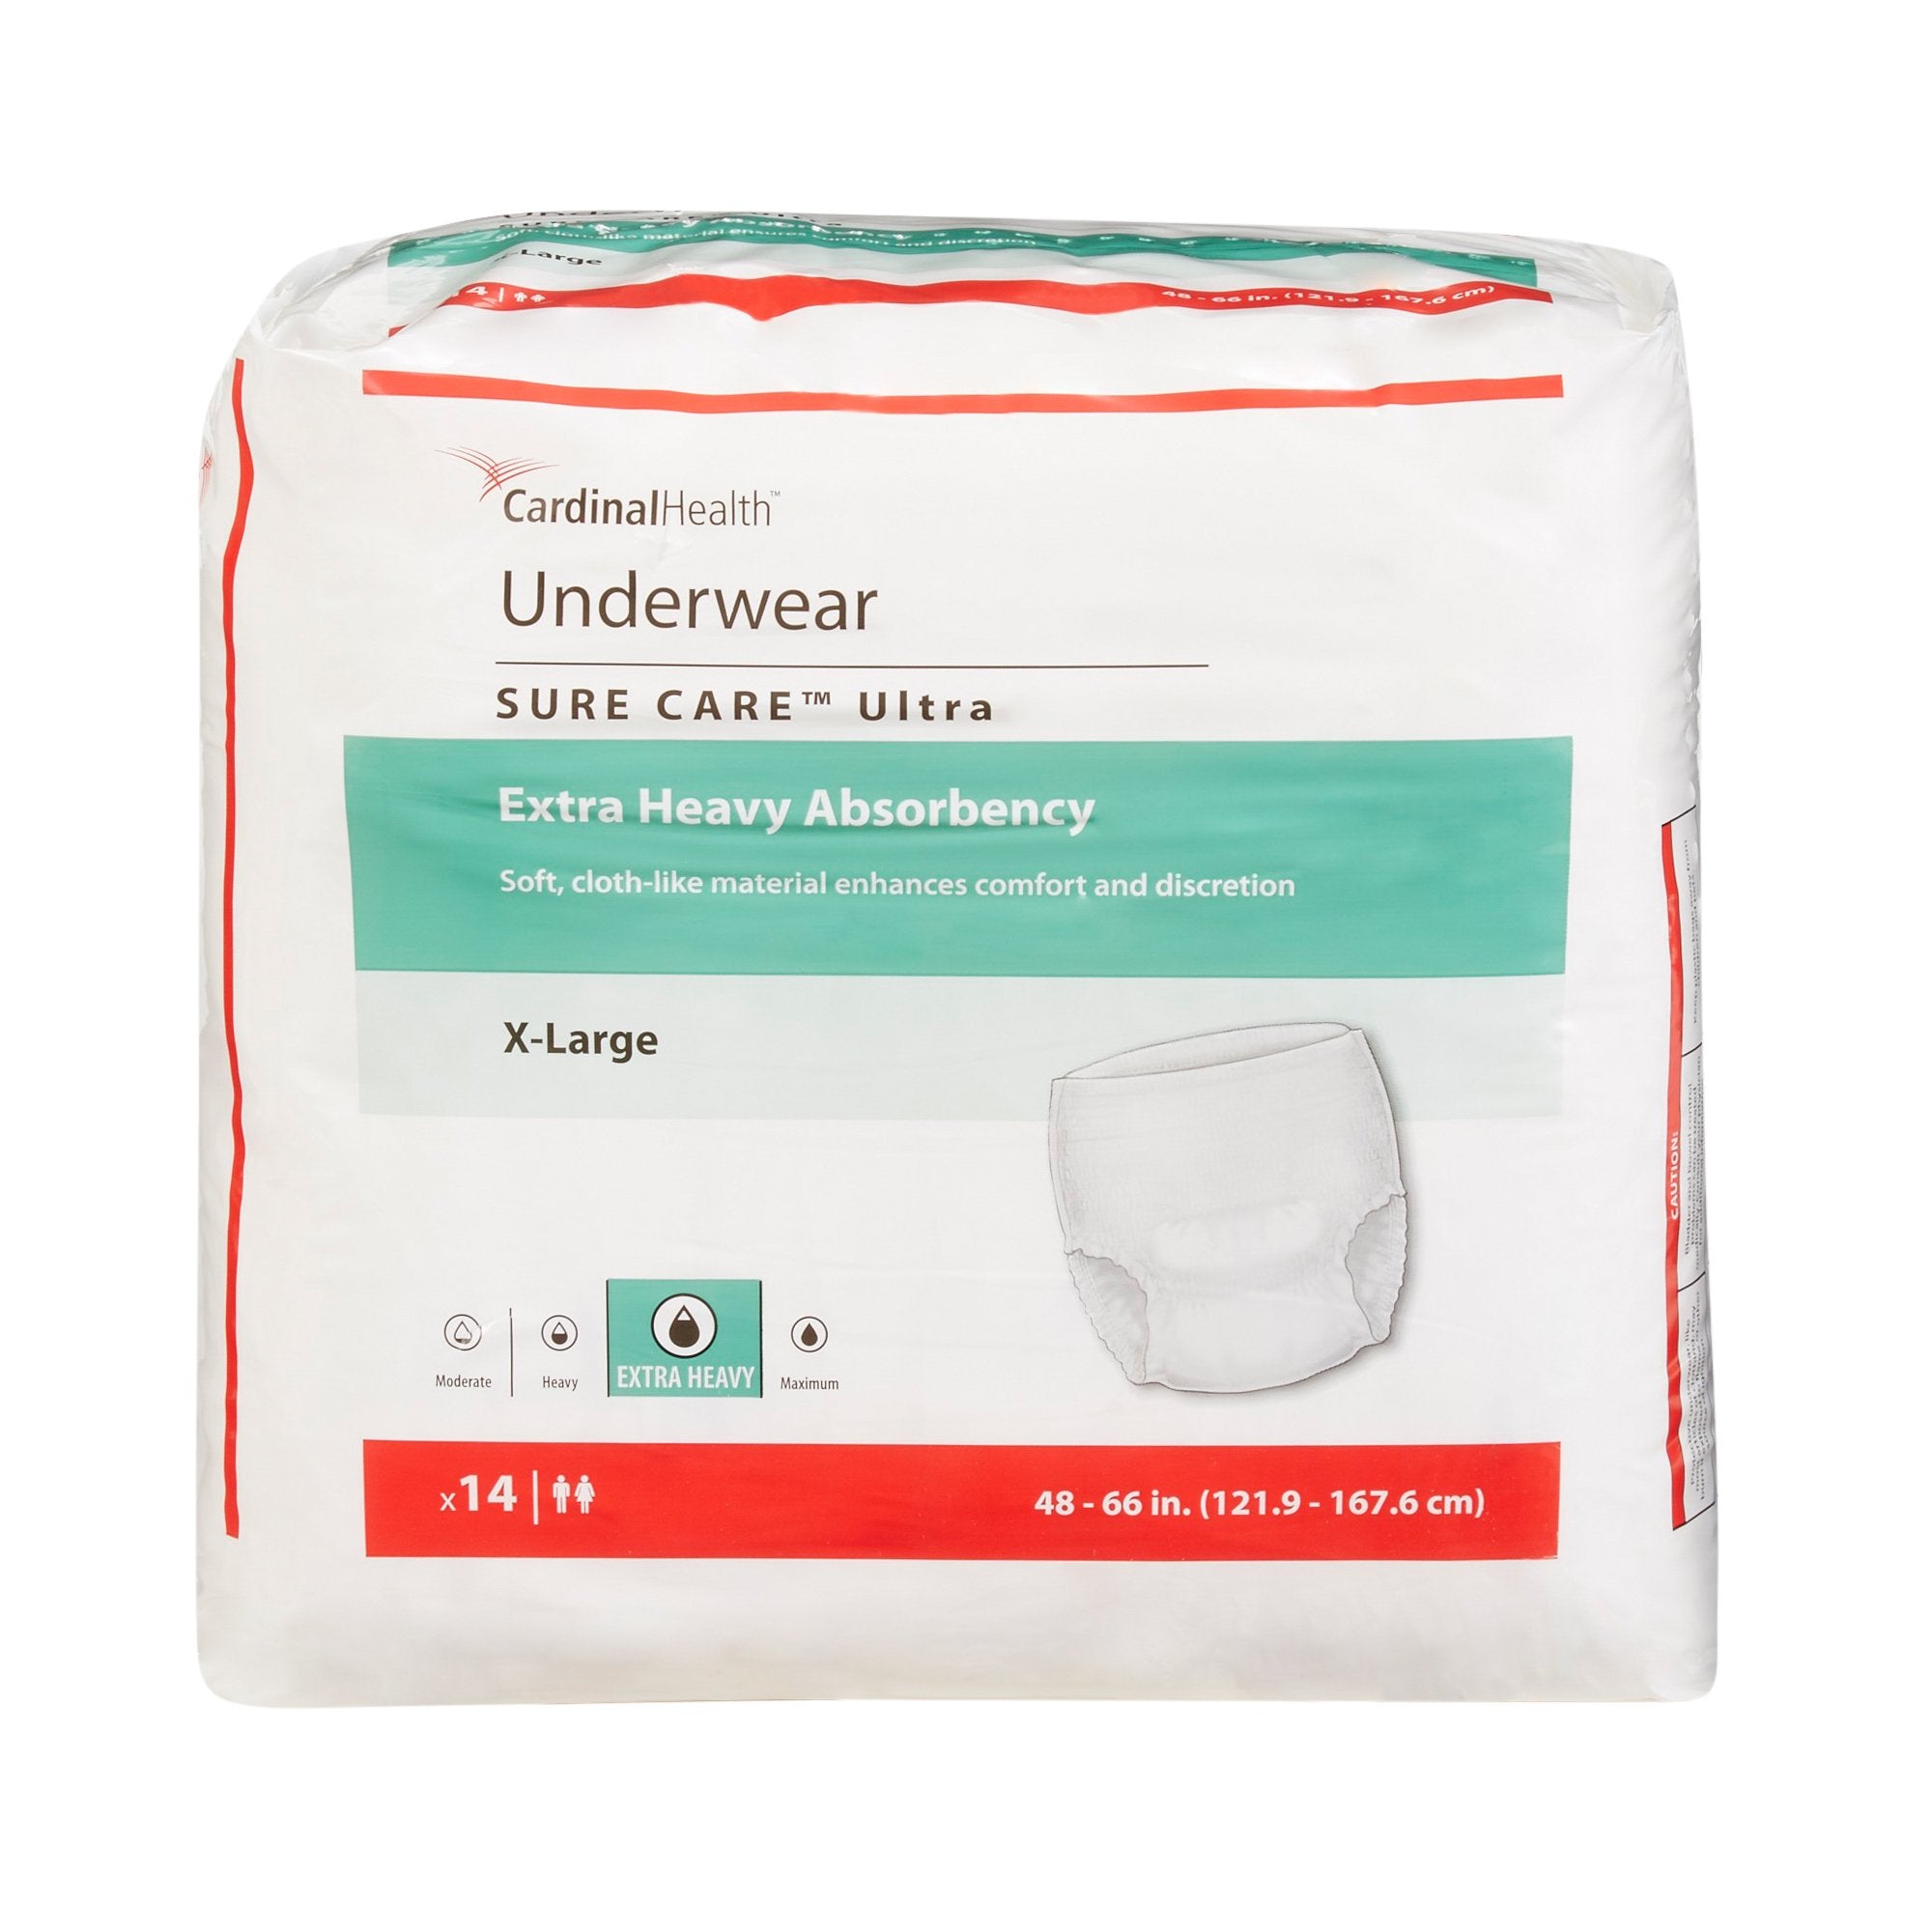 Sure Care™ Ultra Unisex Adult Absorbent Underwear Size X-Large (48-66" Waist) Heavy Absorbency